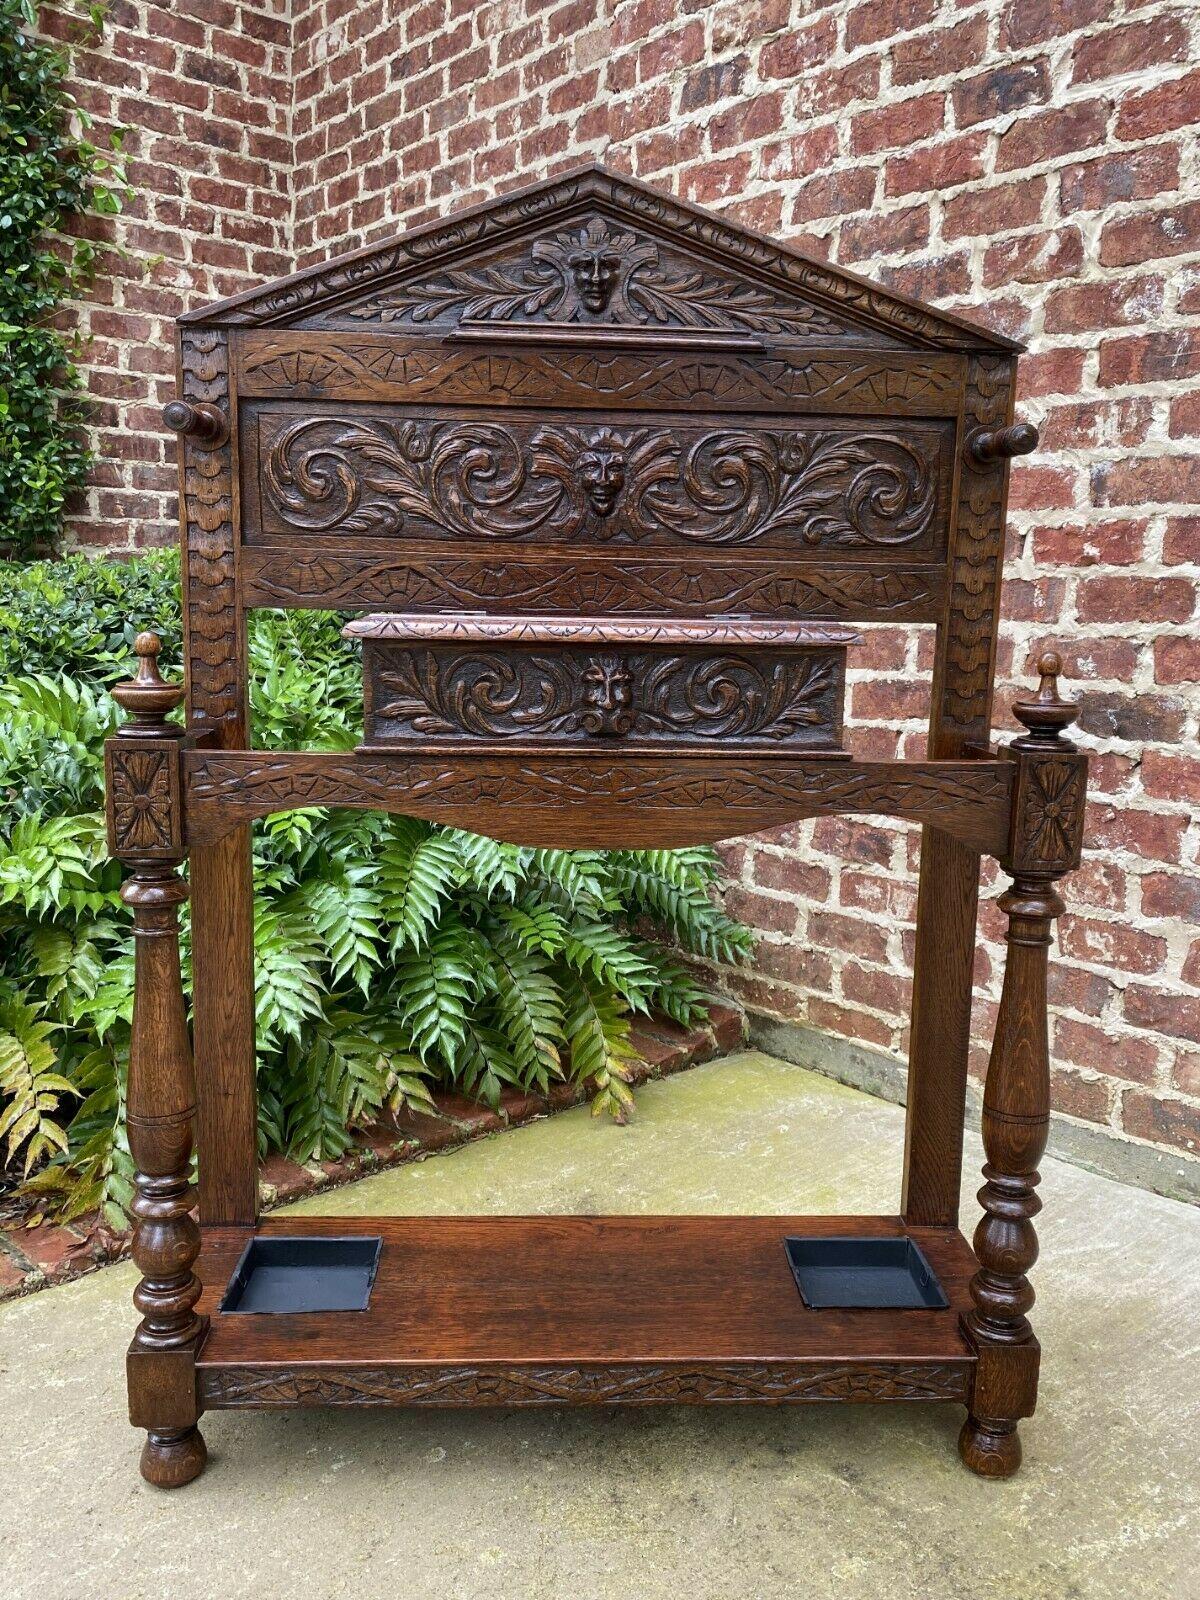 Antique english oak Gothic Revival foyer entry hall tree umbrella stand, cane or stick stand and drip pans c. 1880s-1890s

Outstanding antique English umbrella Stand~~perfect for a entry hall or mudroom for umbrellas or canes~~use it as a